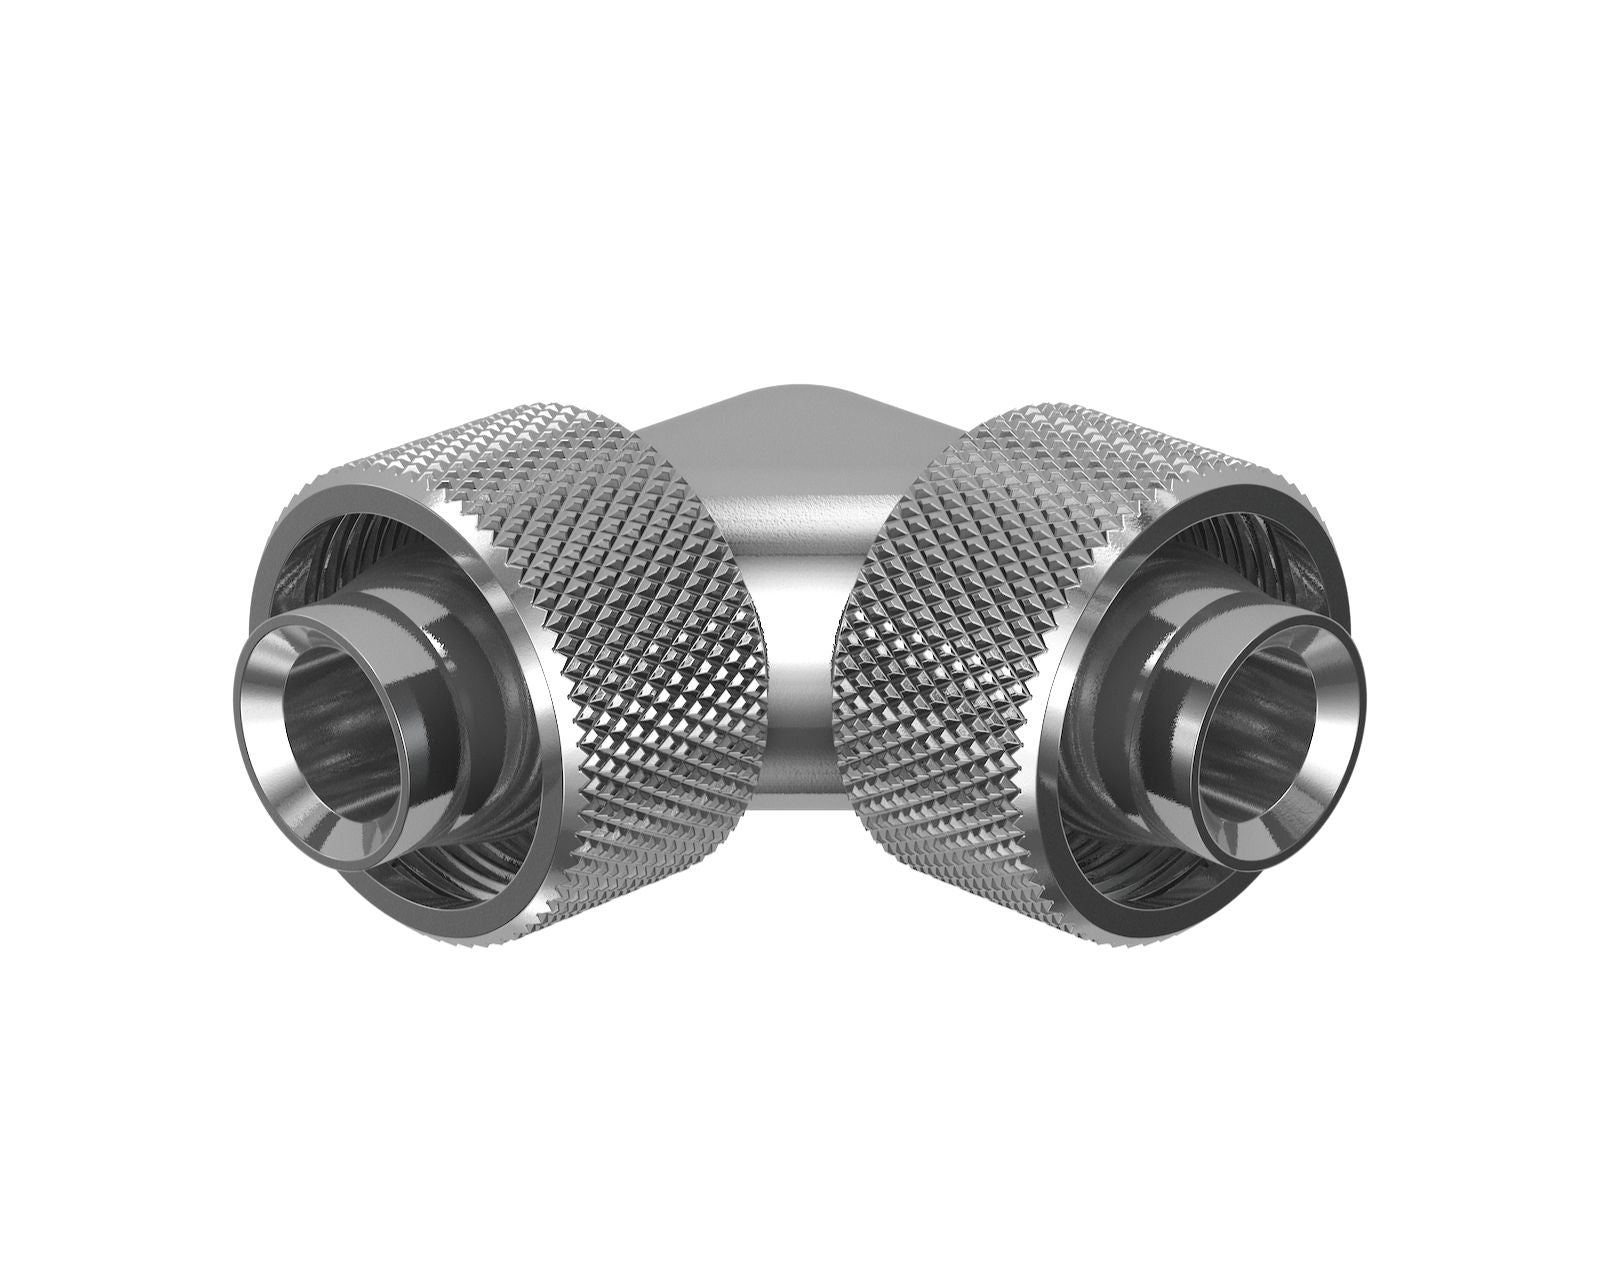 PrimoChill SecureFit SX - Premium 90 Degree Compression Fitting Set For 1/2in ID x 3/4in OD Flexible Tubing (F-SFSX3490) - Available in 20+ Colors, Custom Watercooling Loop Ready - Silver Nickel